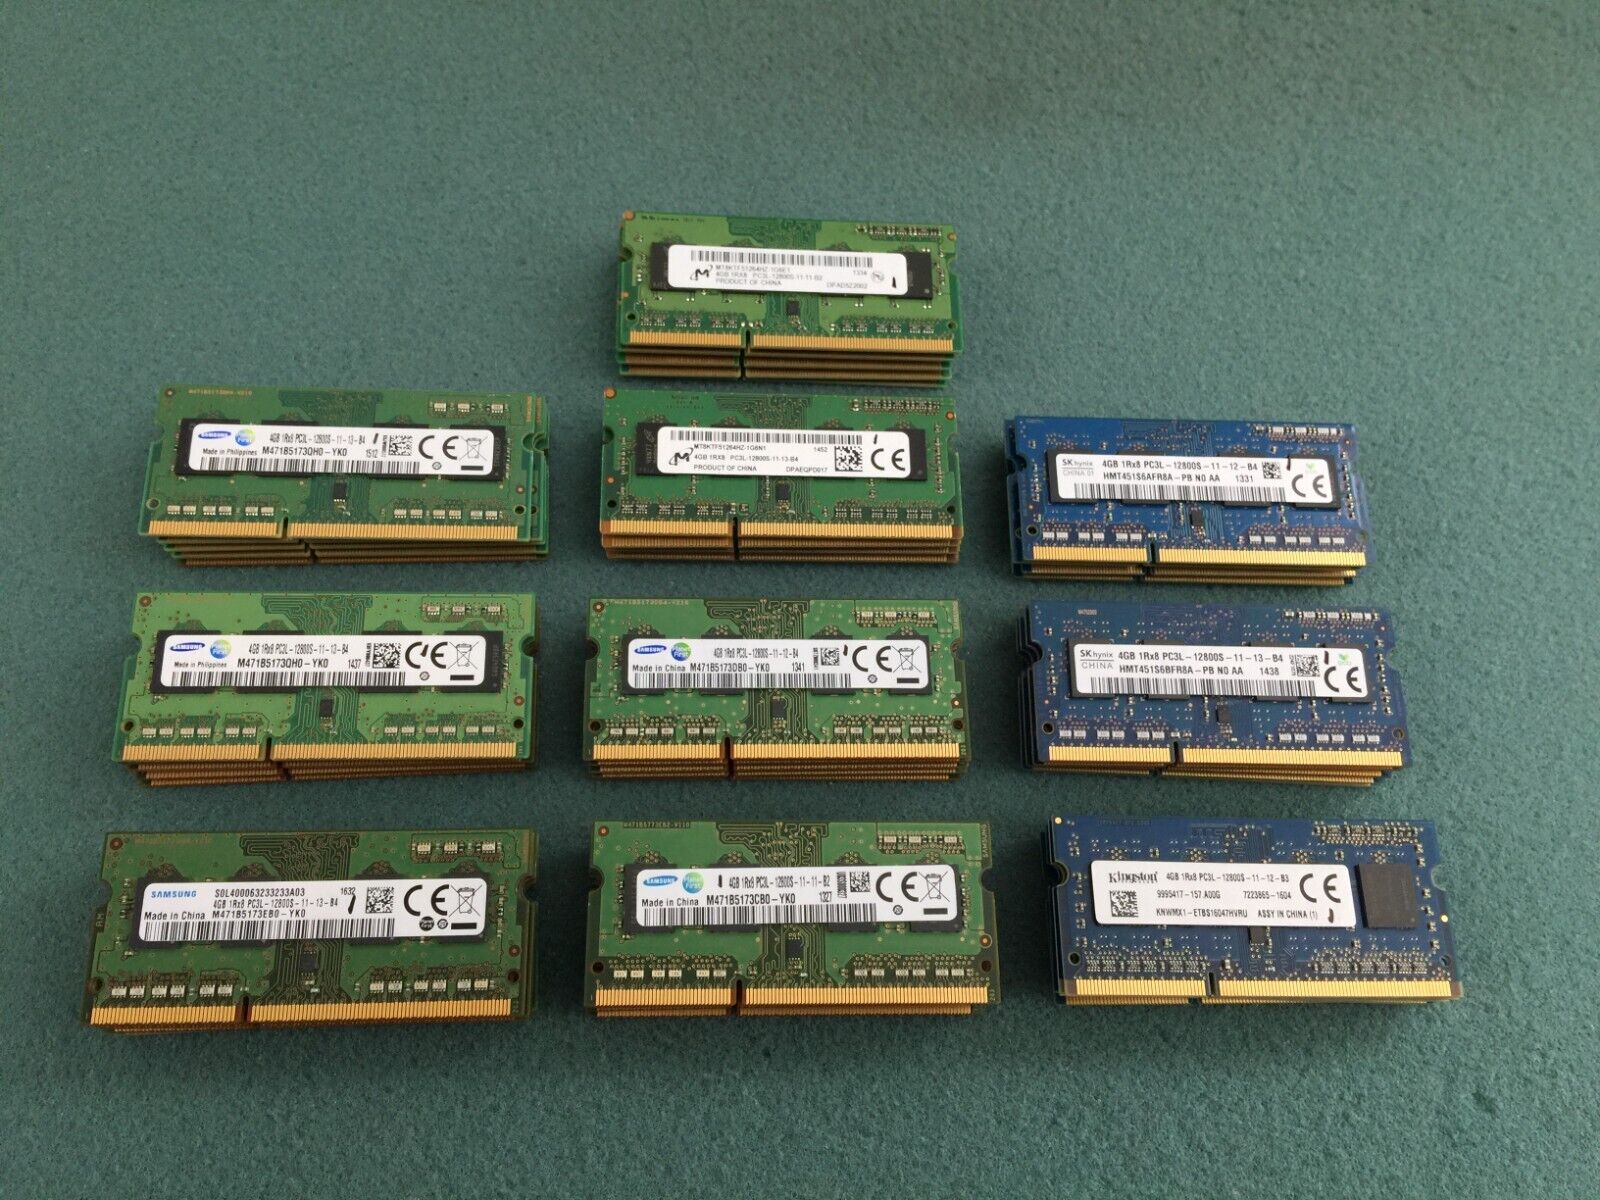 (Lot of 50) Mixed Brand 4GB 1Rx8 PC3L-12800S DDR3 SODIMM Laptop Memory RAM R433